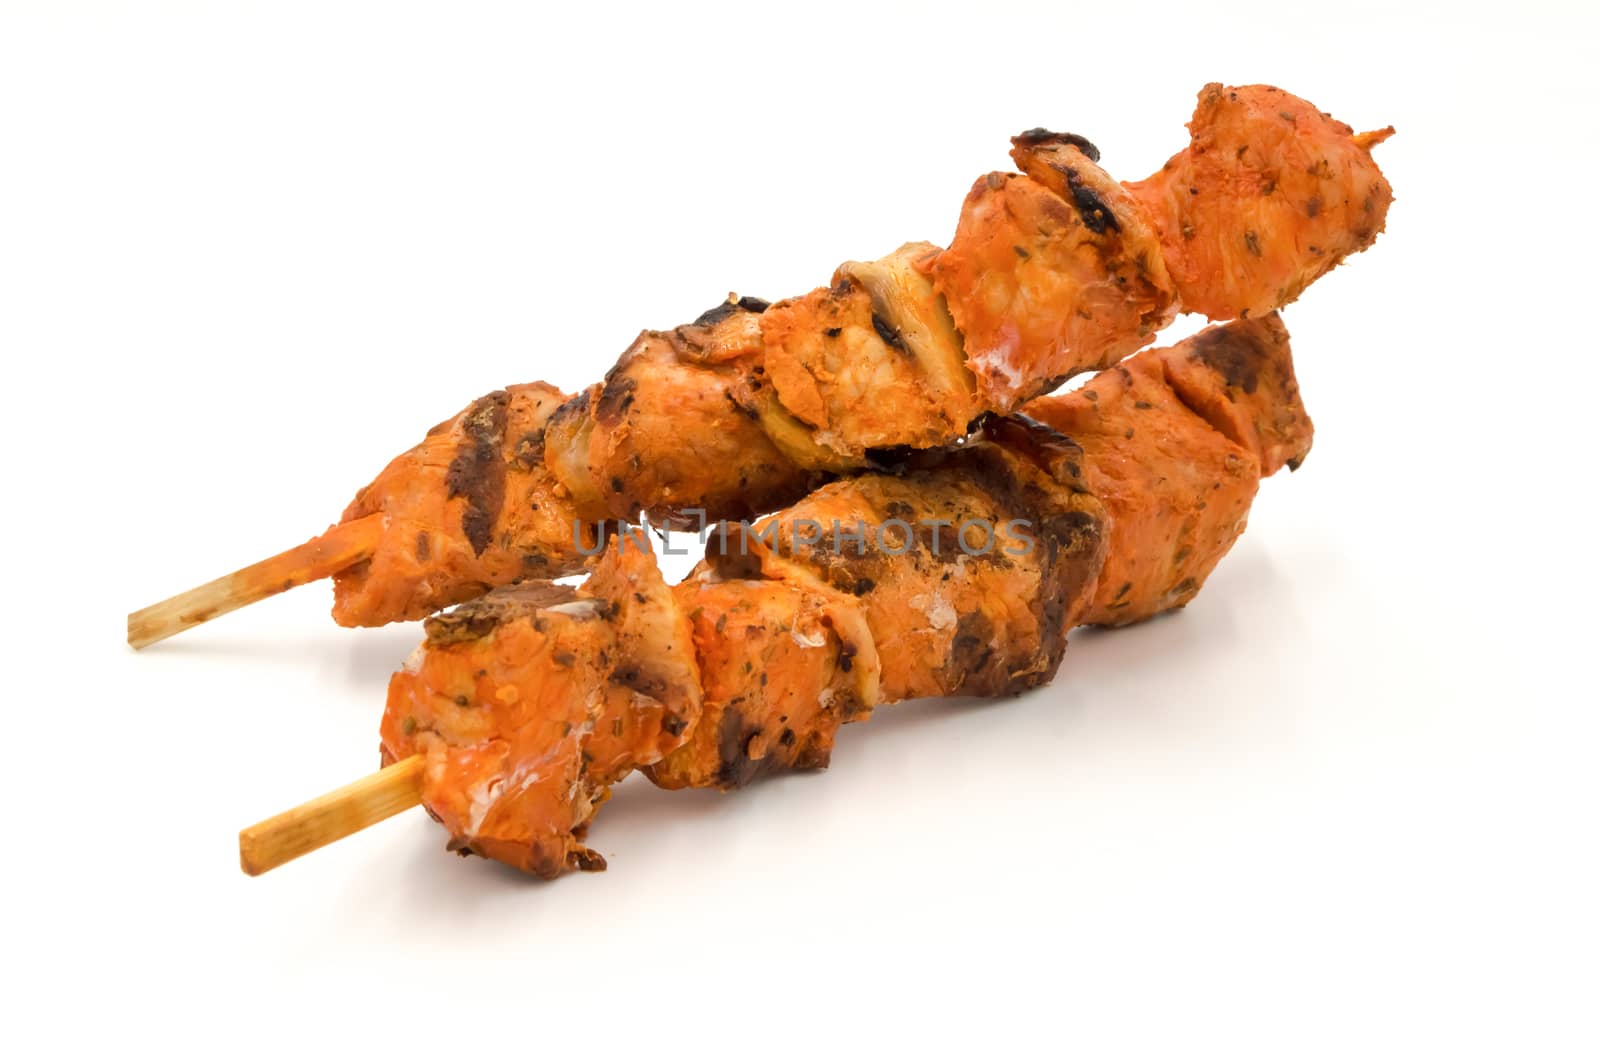 Grilled pork skewers isolated on white background, pork barbecue